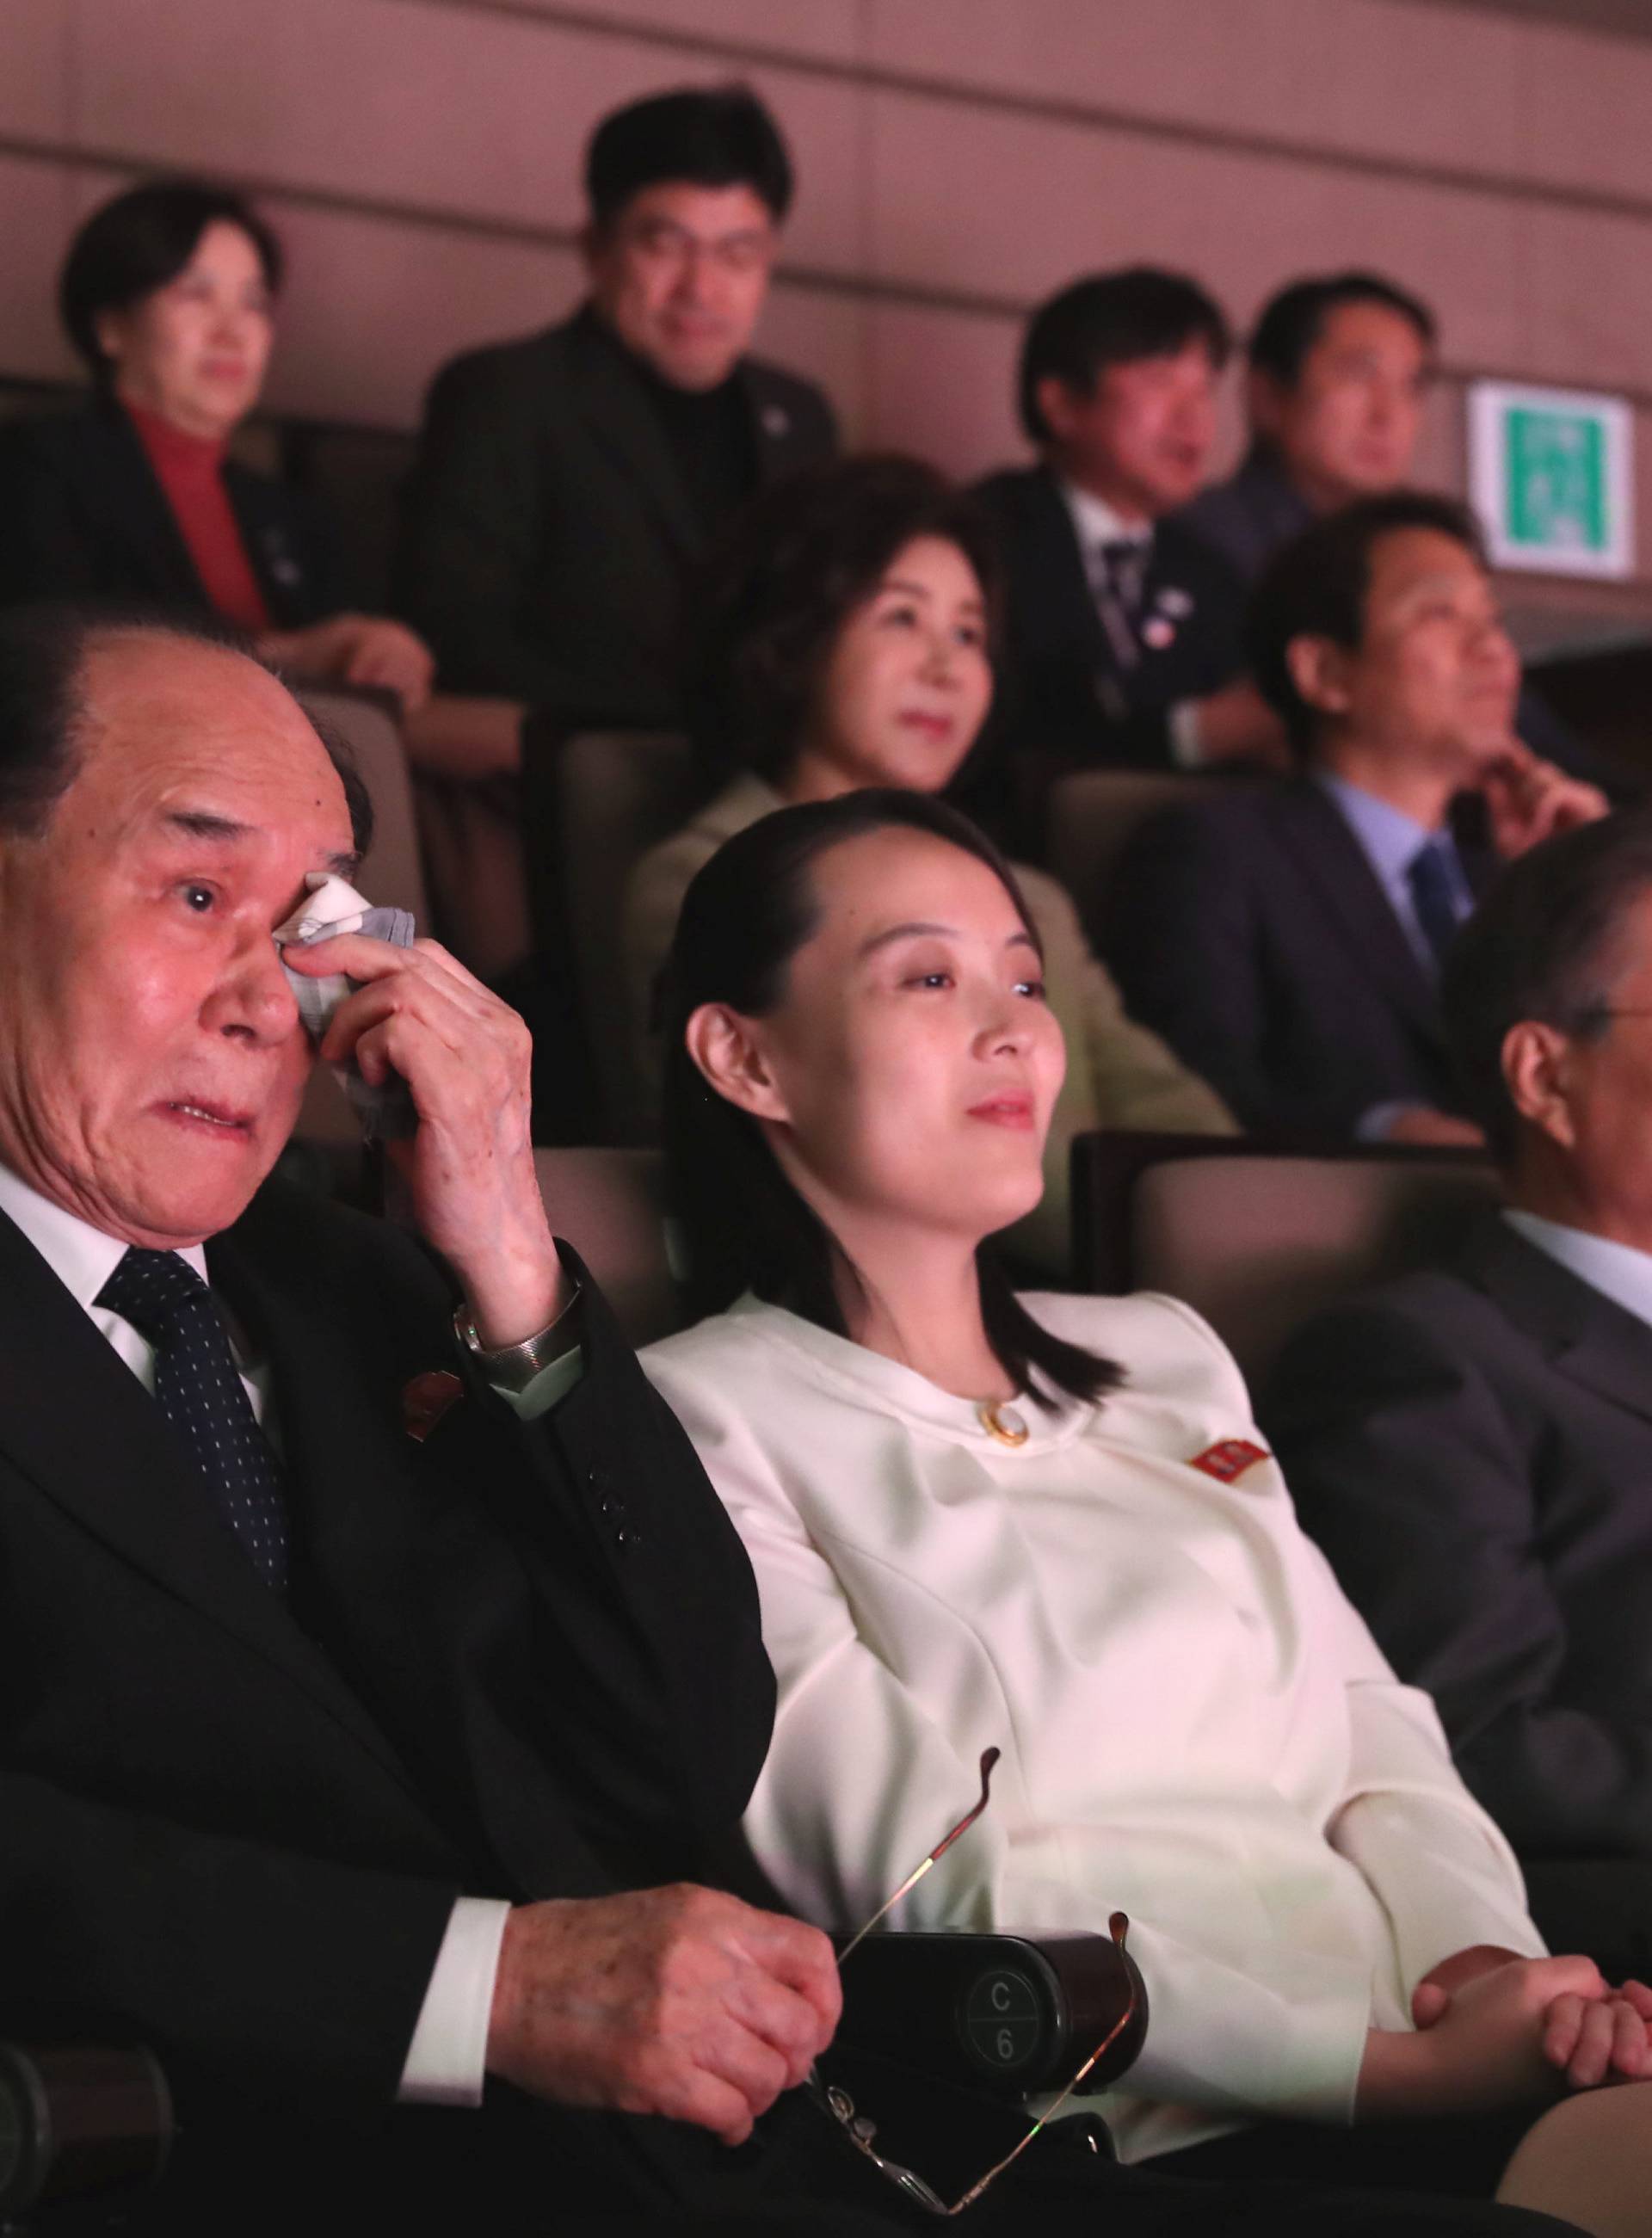 Kim Young Nam reacts as he watches the North Korea's Samjiyon Orchestra's performance with South Korean President Moon Jae-in, his wife Kim Jung-Suk and Kim Yo Jong in Seoul